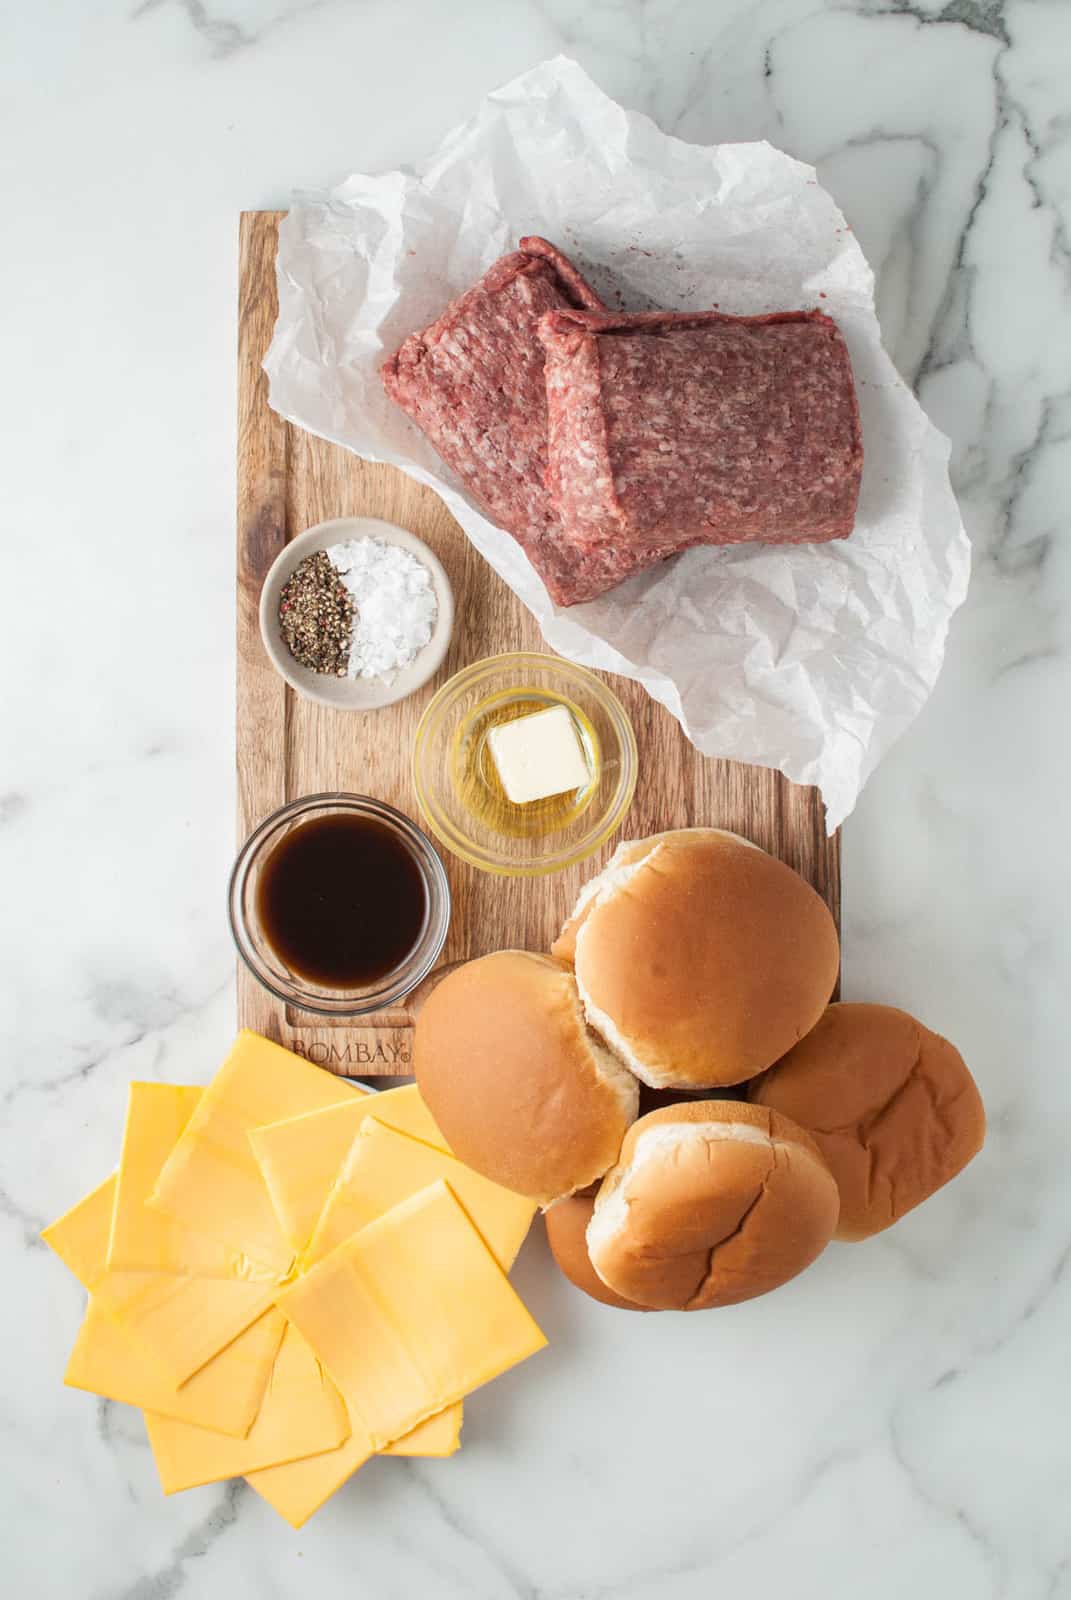 Ingredients needed to make a Juicy Lucy Recipe